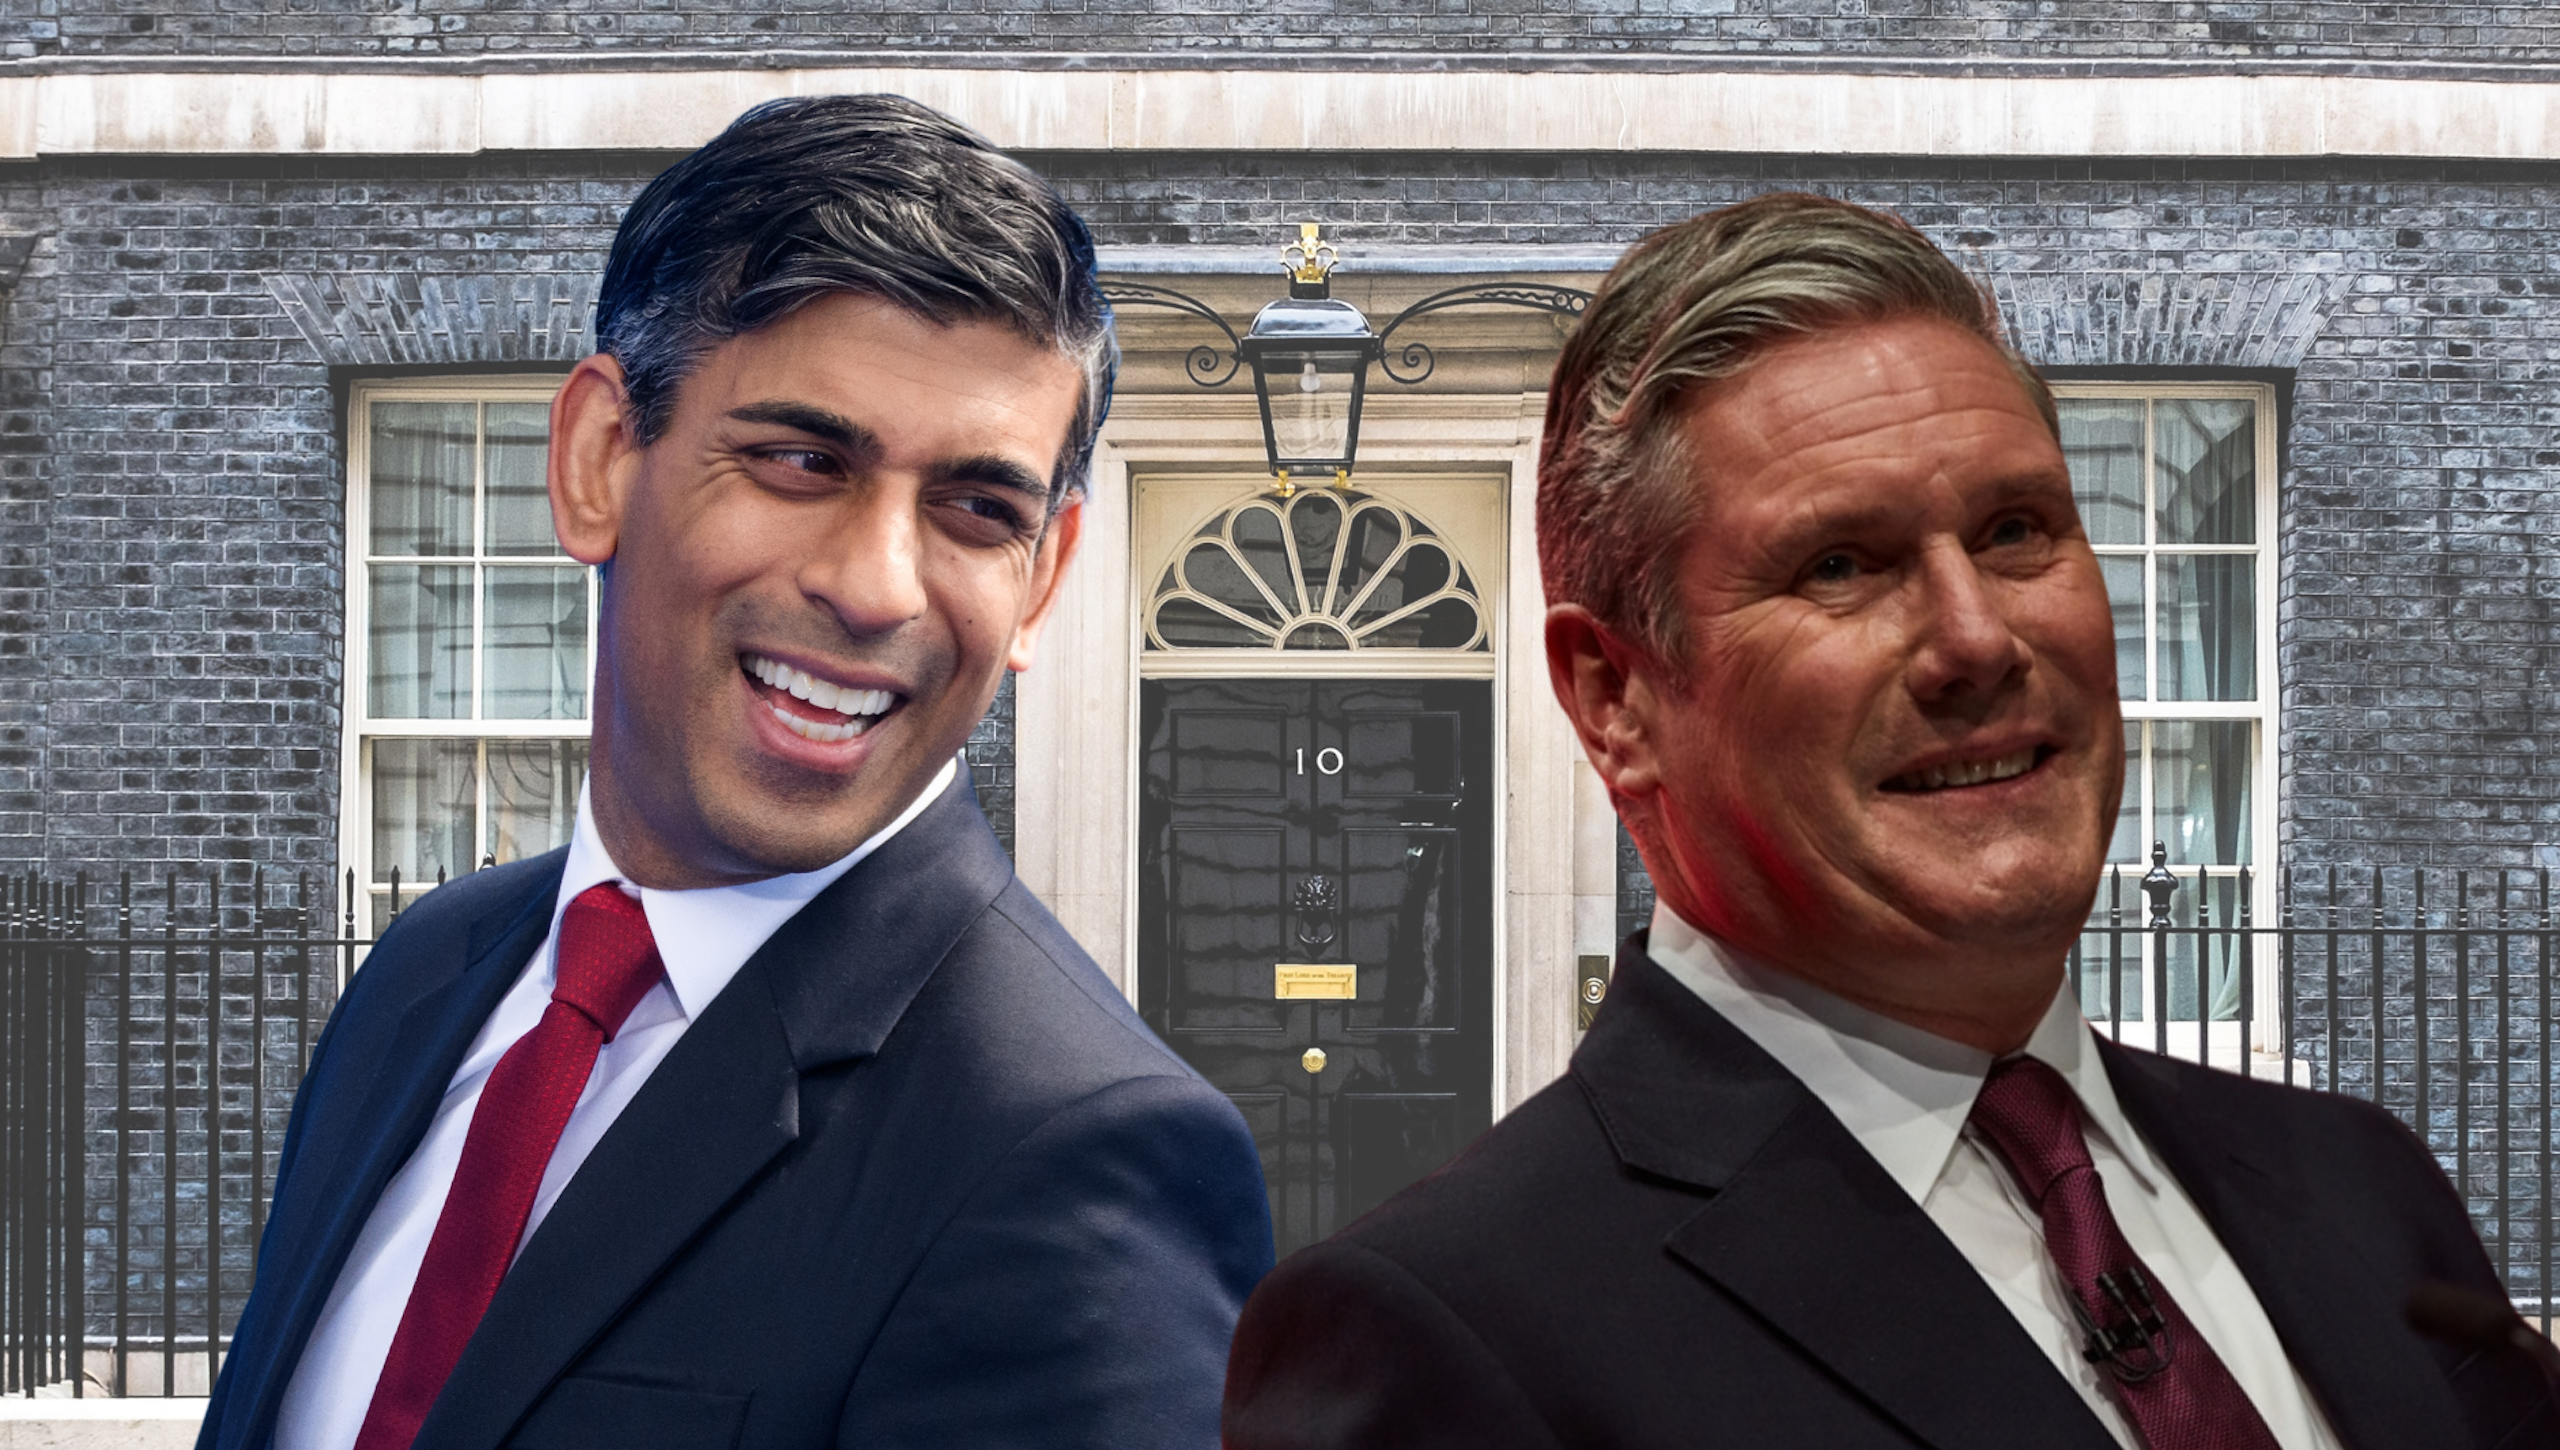 Collage of Rishi Sunak and Keir Starmer, both smiling, over a background of Number 10 Downing Street